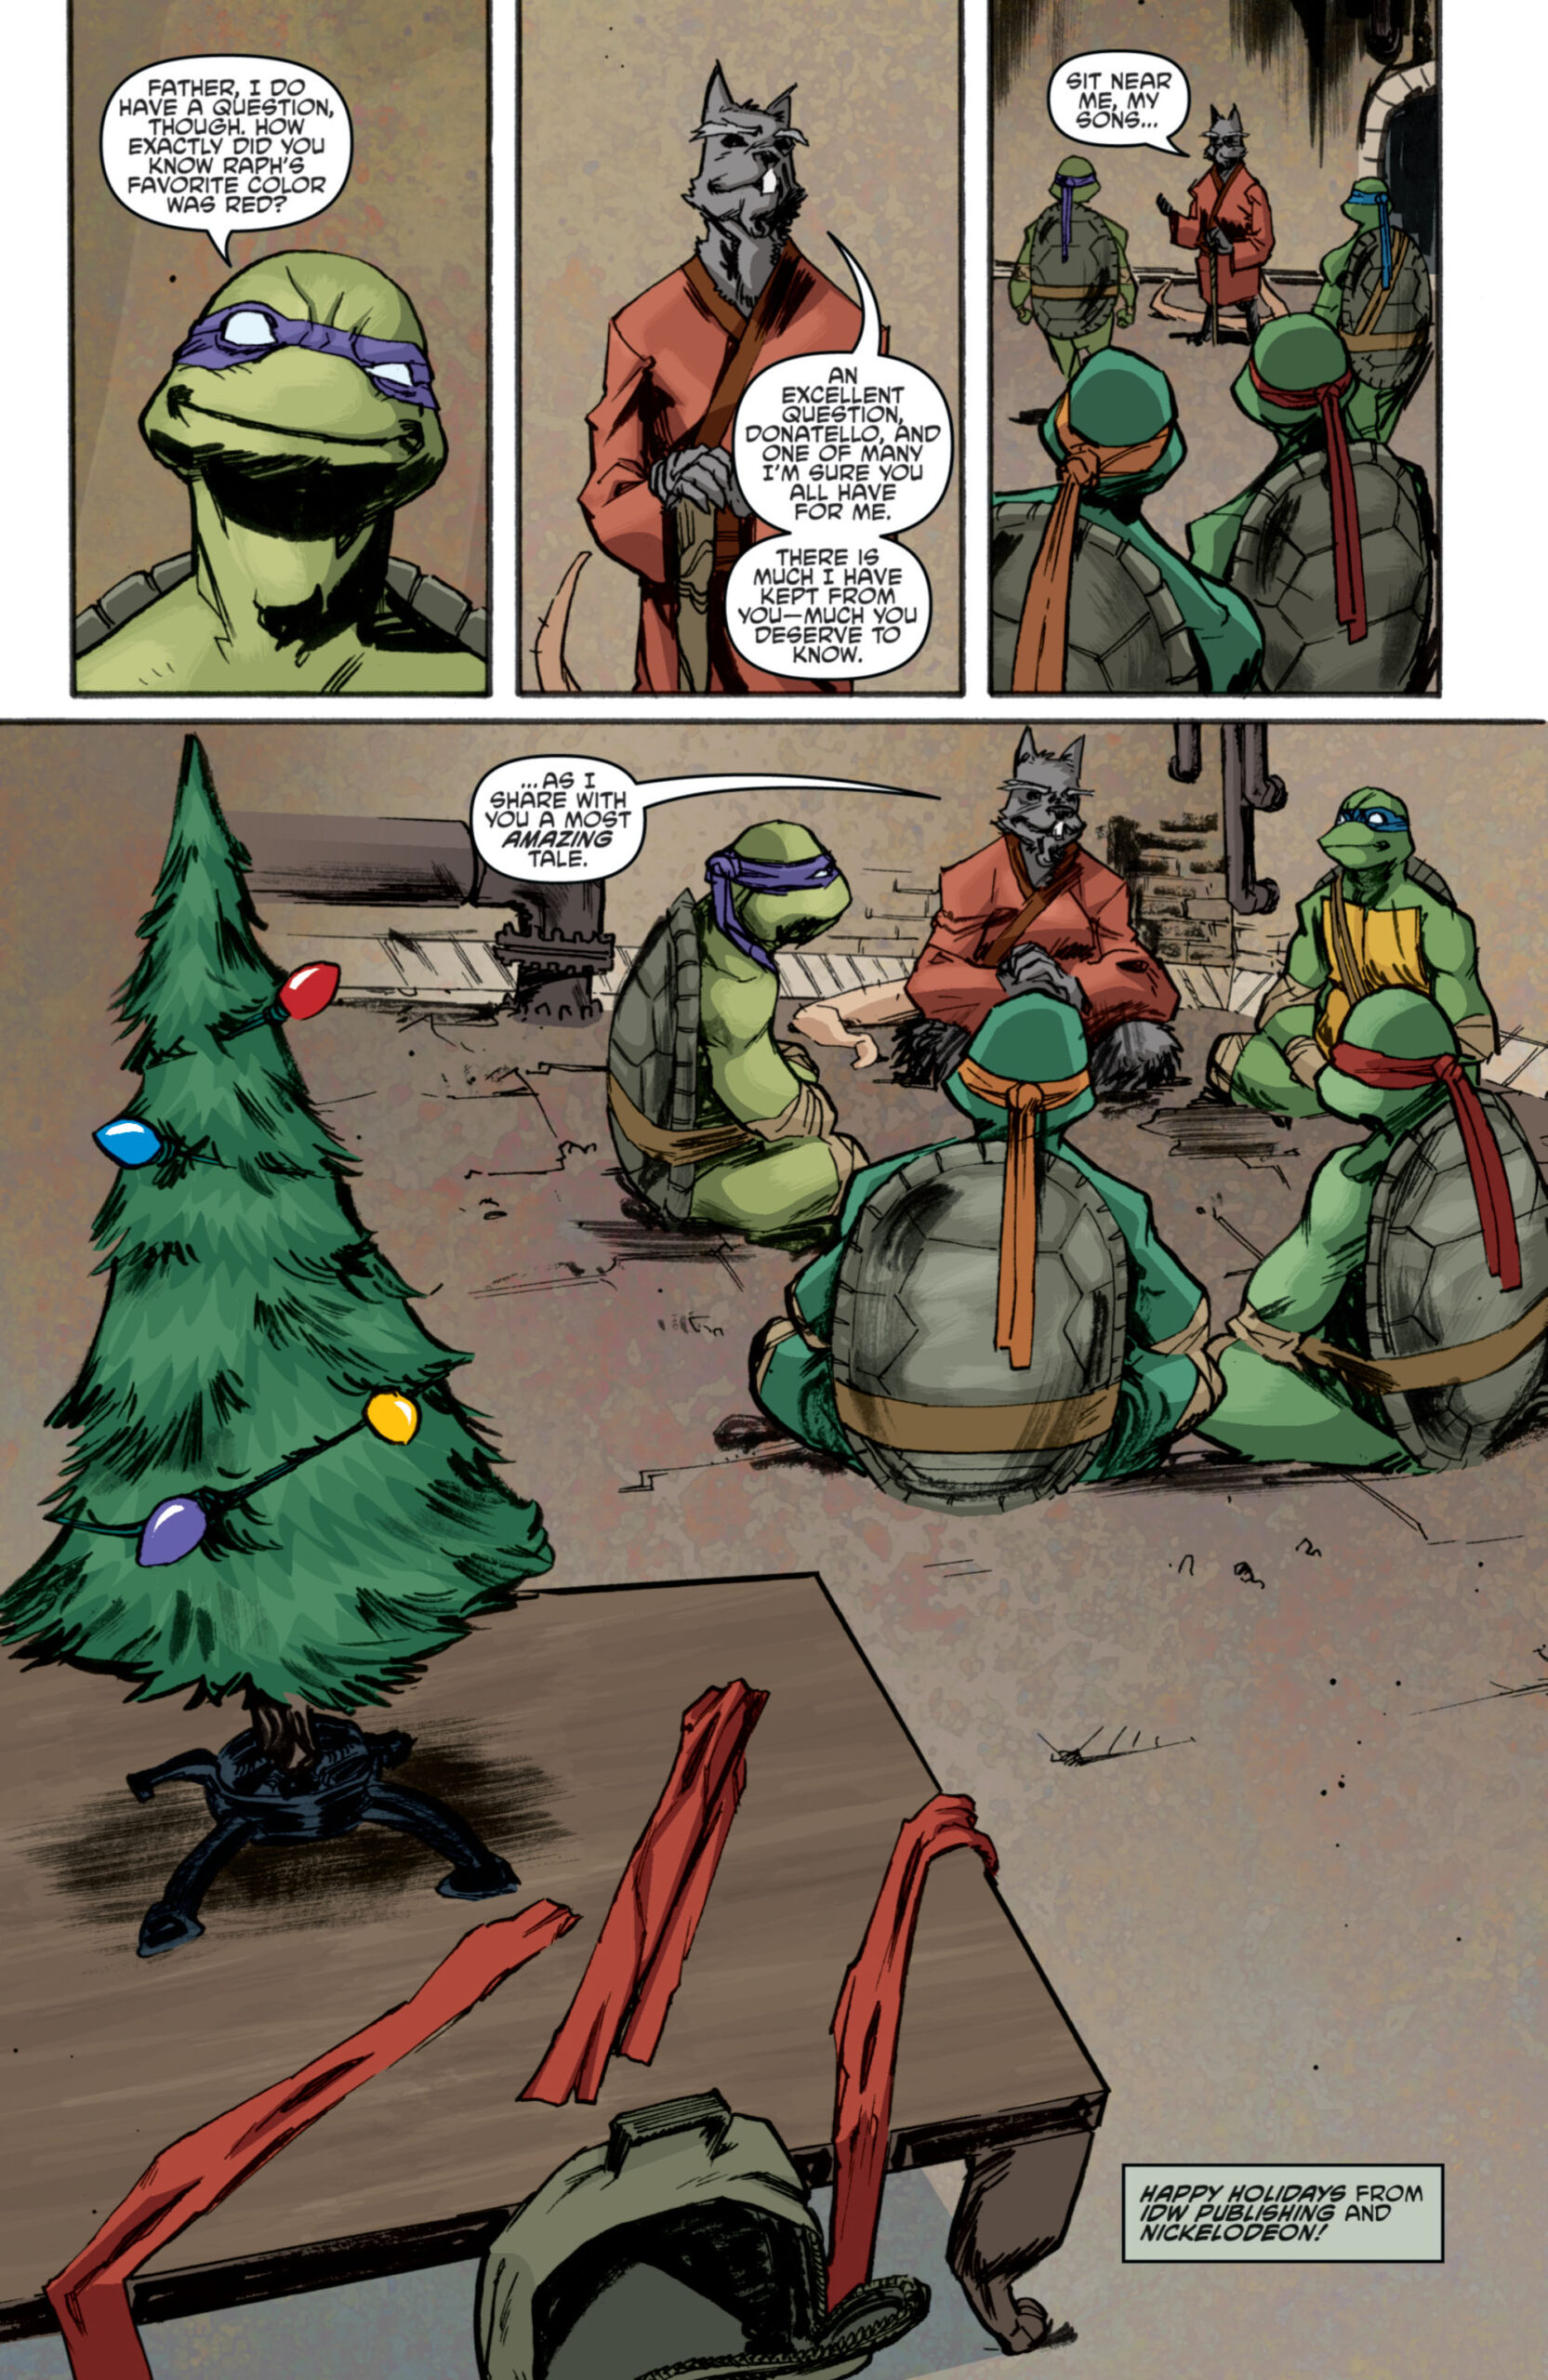 Splinter recalls his family's history to his sons in Teenage Mutant Ninja Turtles Vol. 1 #5 "Enemies Old, Enemies New: Prologue" (2011), IDW. Words by Kevin Eastman and Tom Waltz, art by Dan Duncan, Mateus Santolouco, Ronda Pattison, and Shawn Lee.